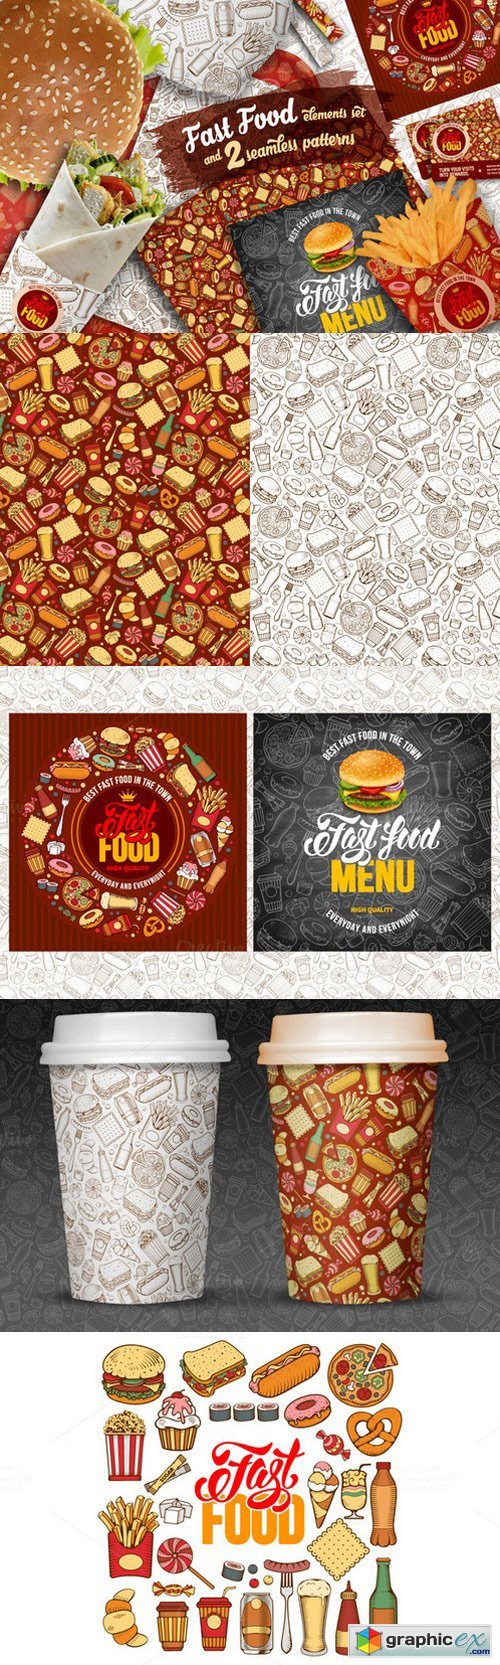 Fast Food Patterns and Elements